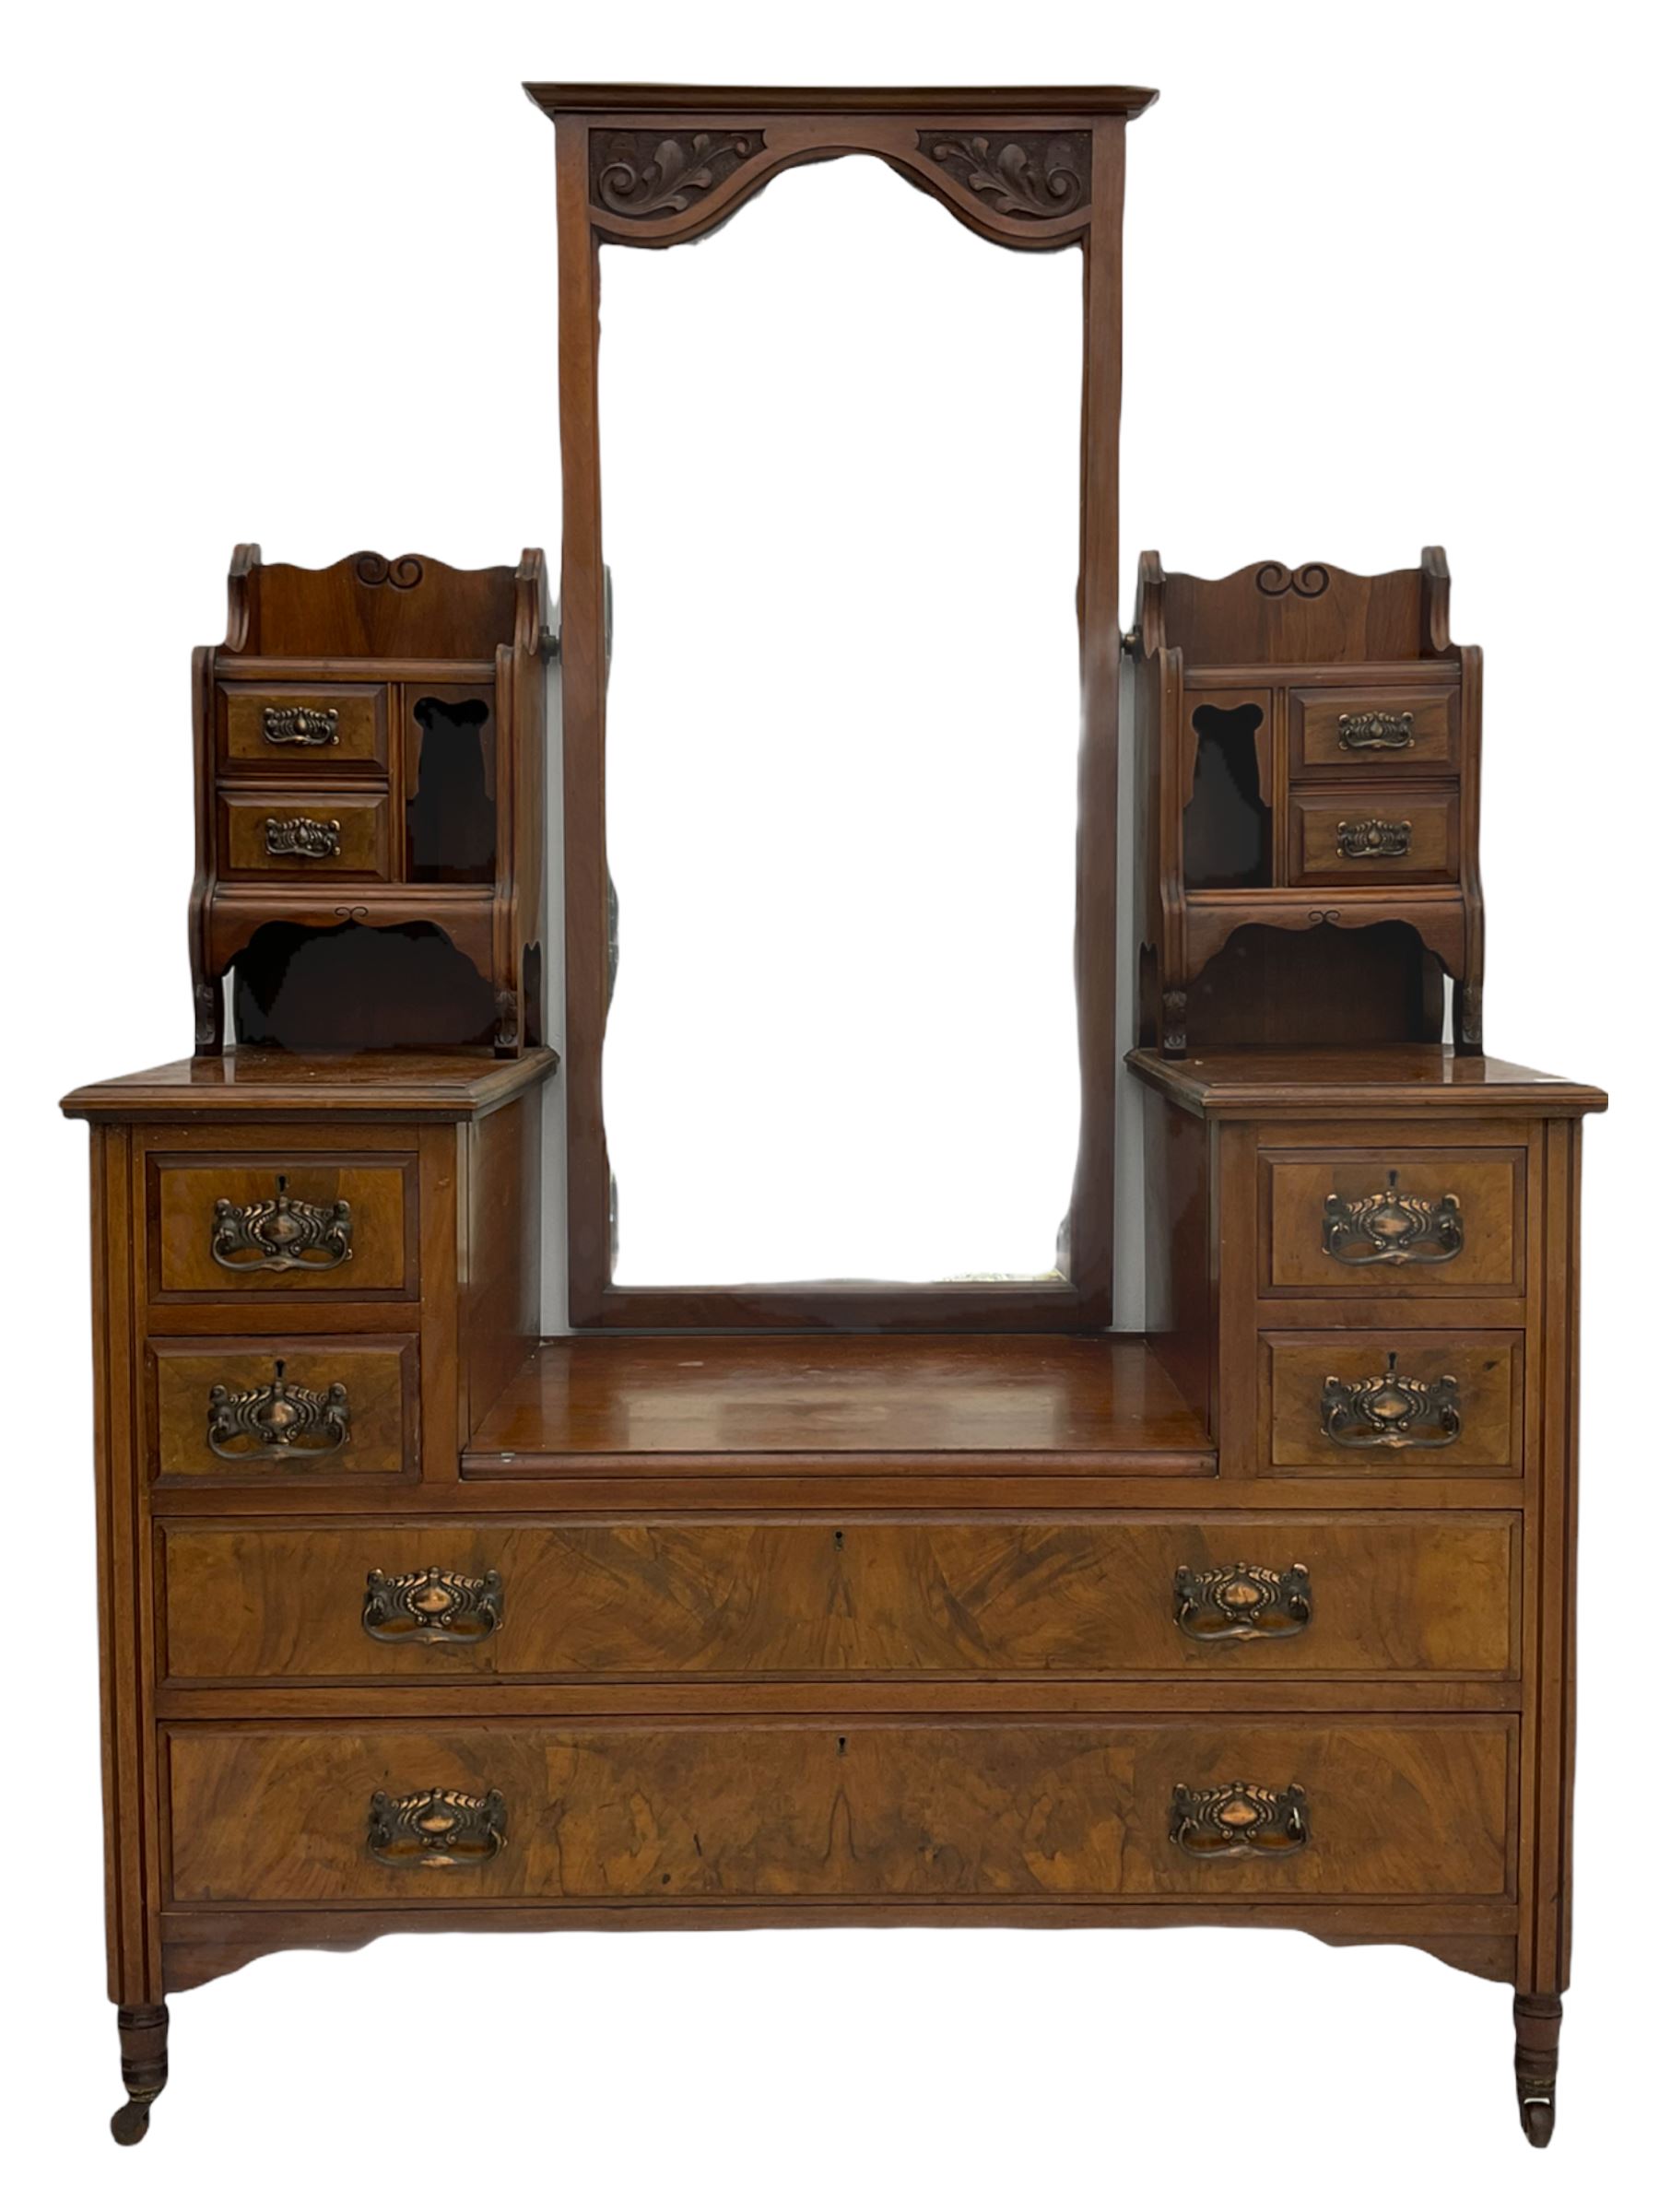 Late 19th century walnut dressing chest - Image 2 of 8